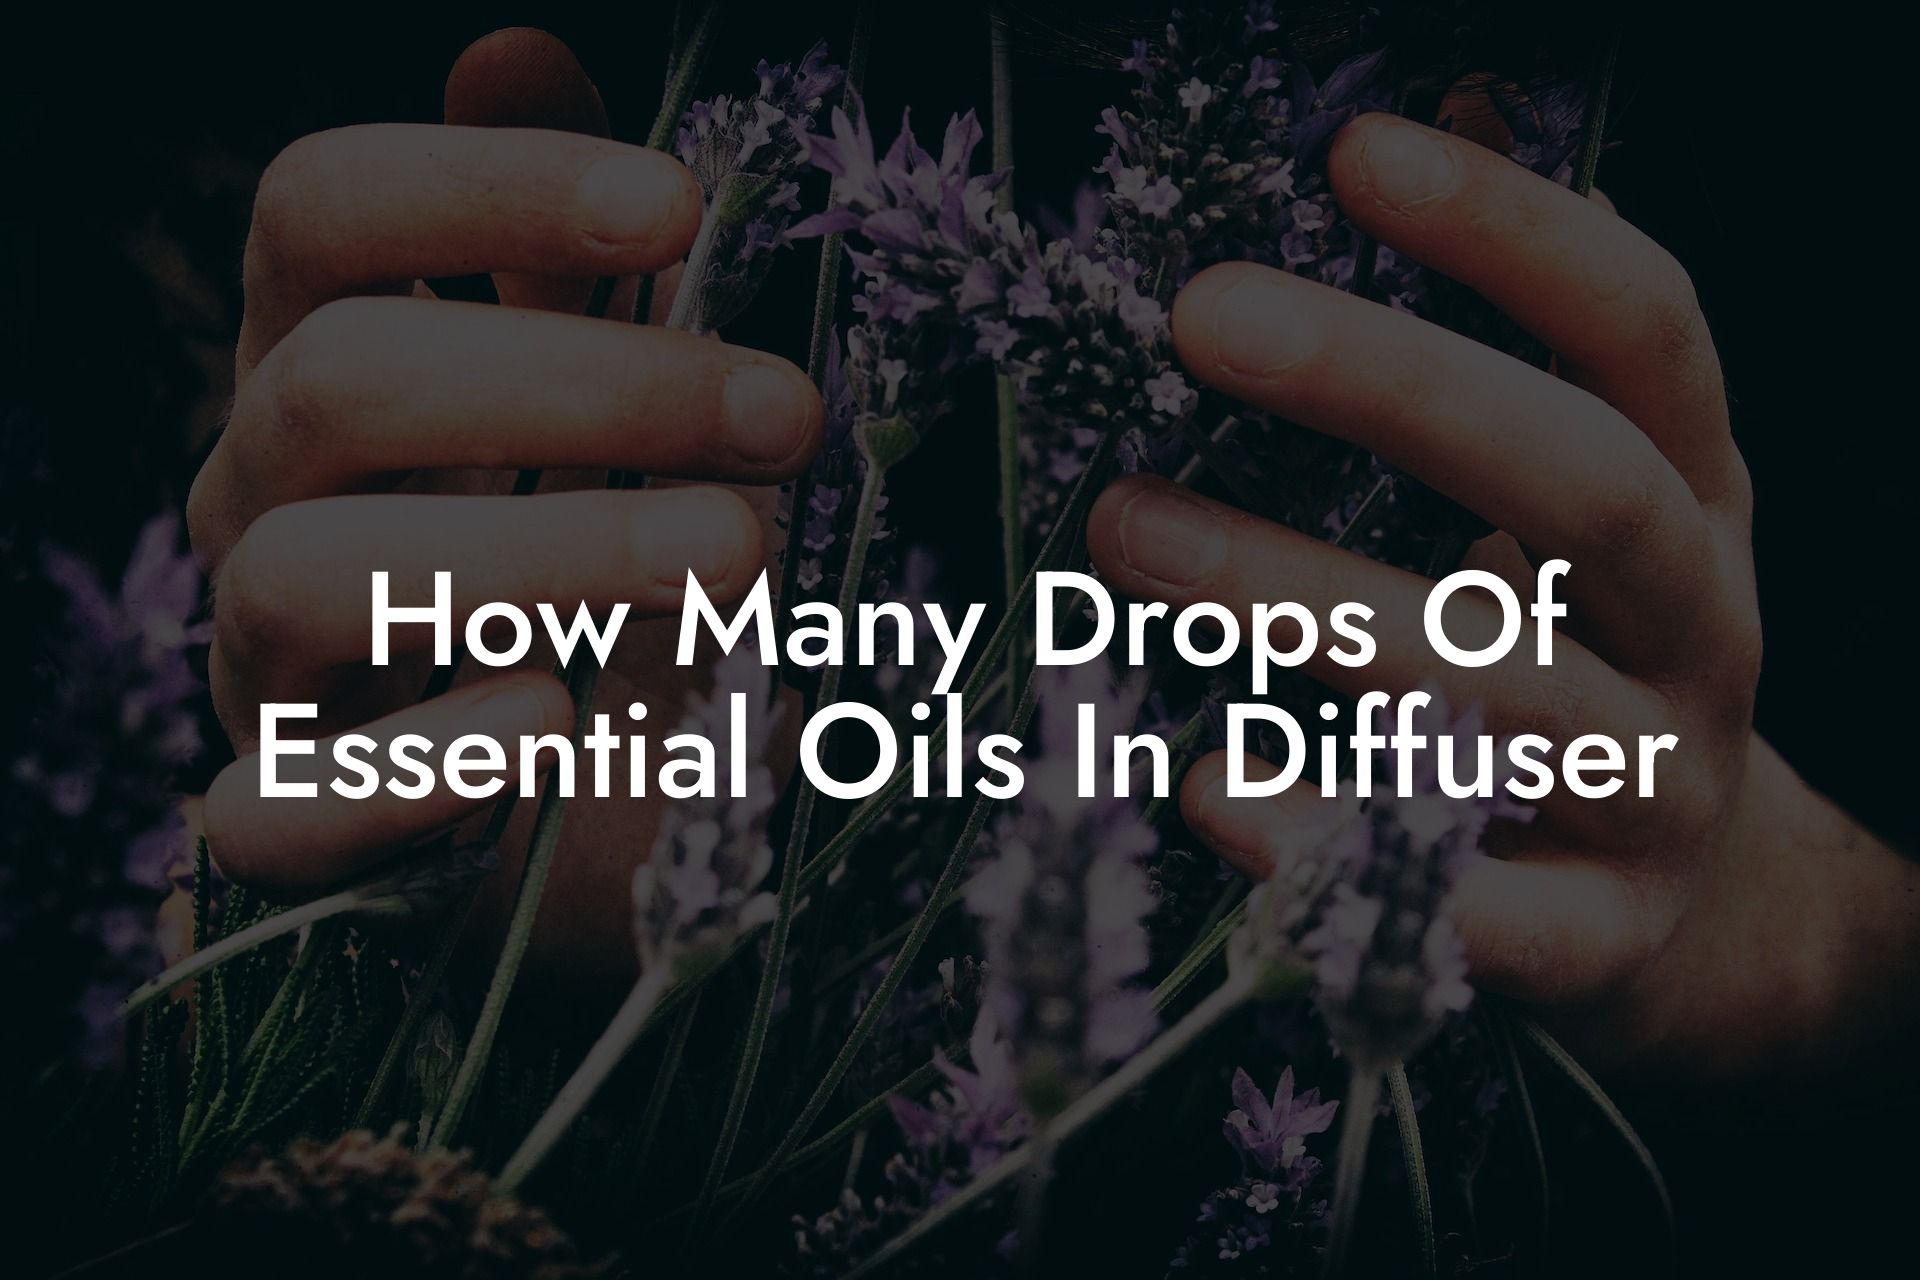 How Many Drops Of Essential Oils In Diffuser